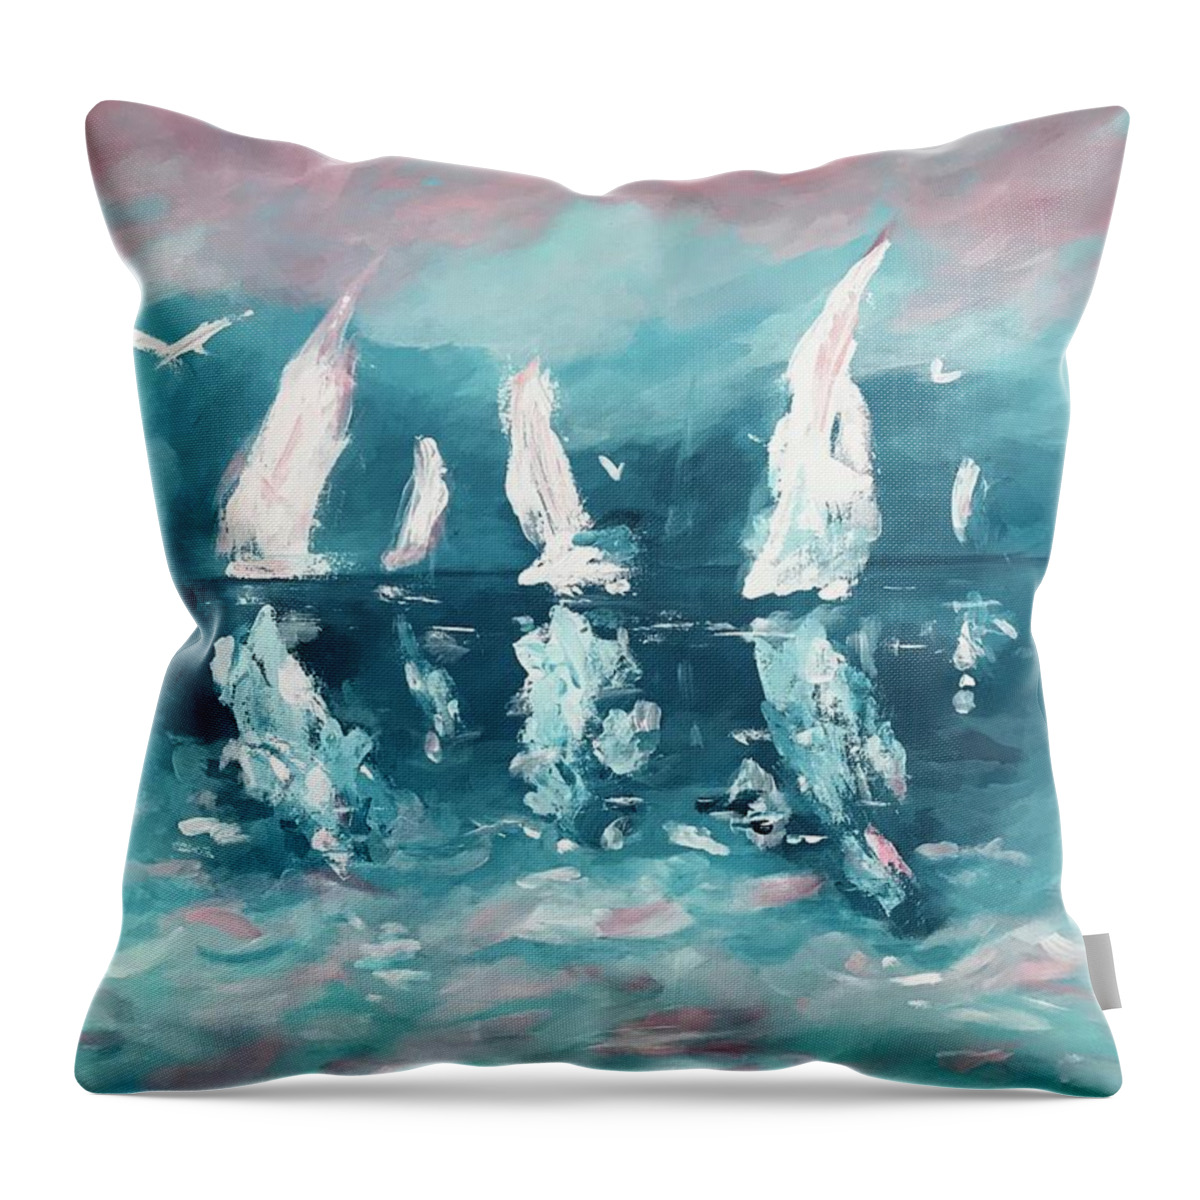 Art Throw Pillow featuring the painting Offshore by Deborah Smith